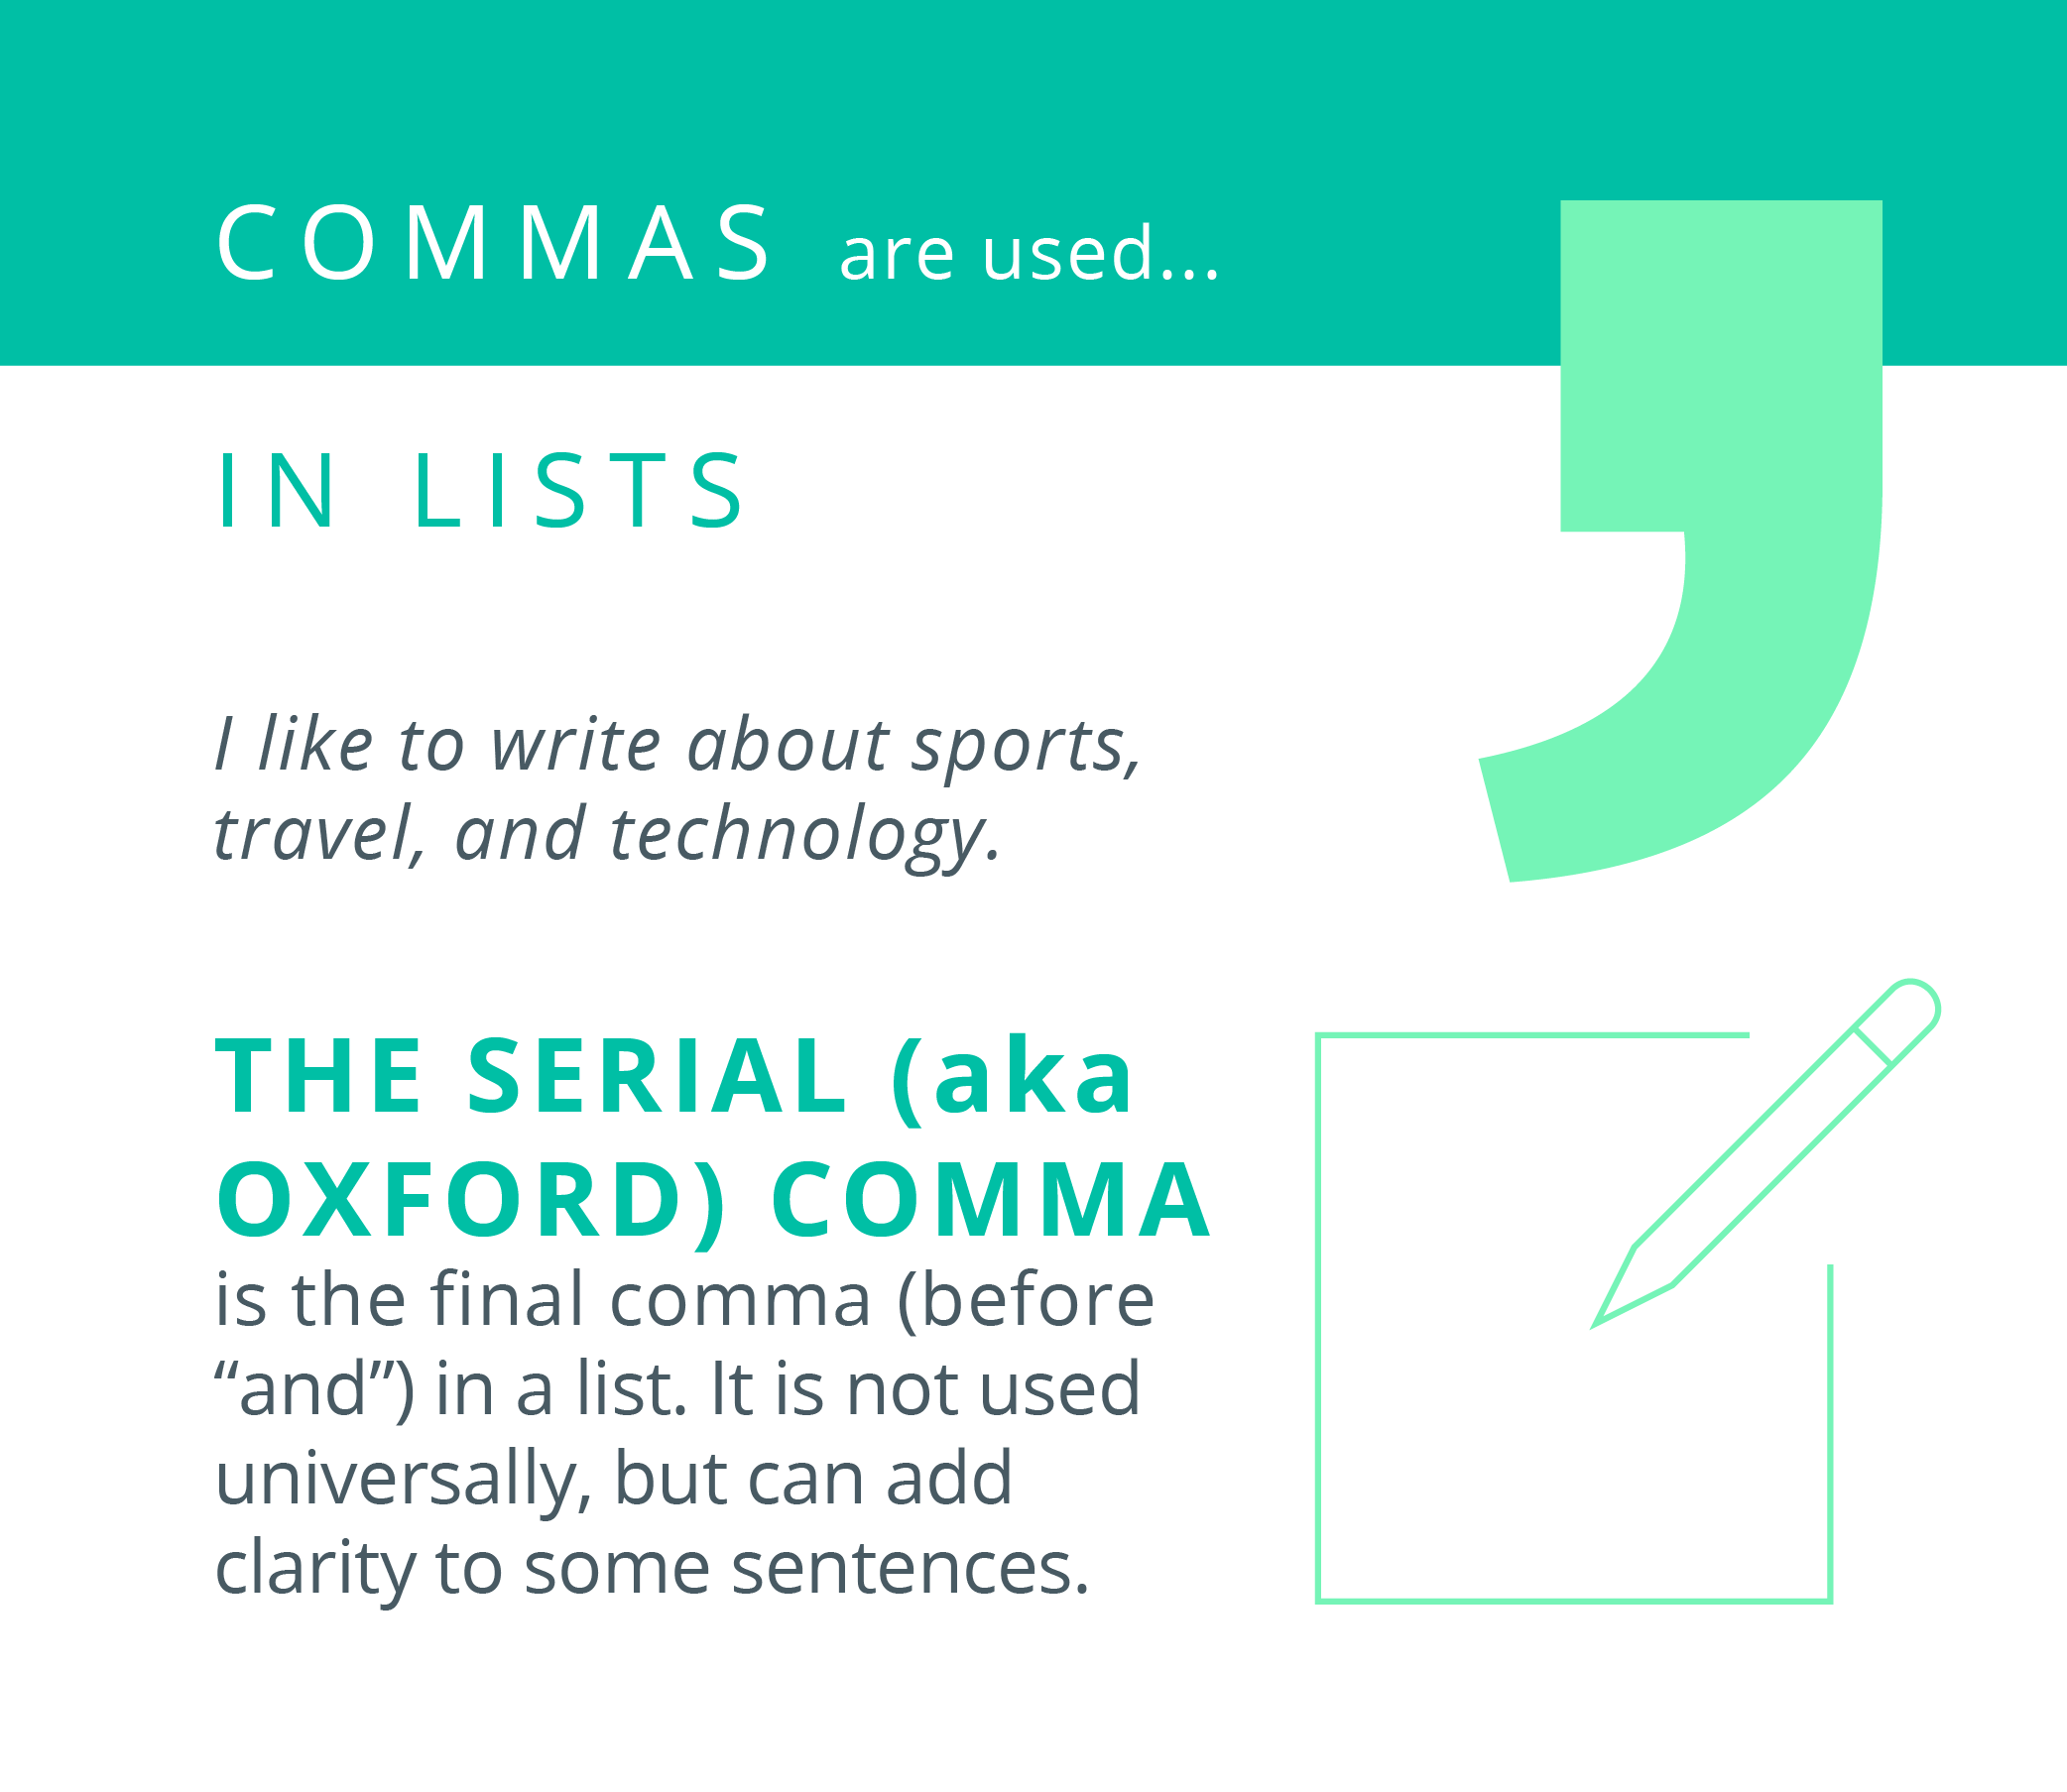 Commas are used in lists.